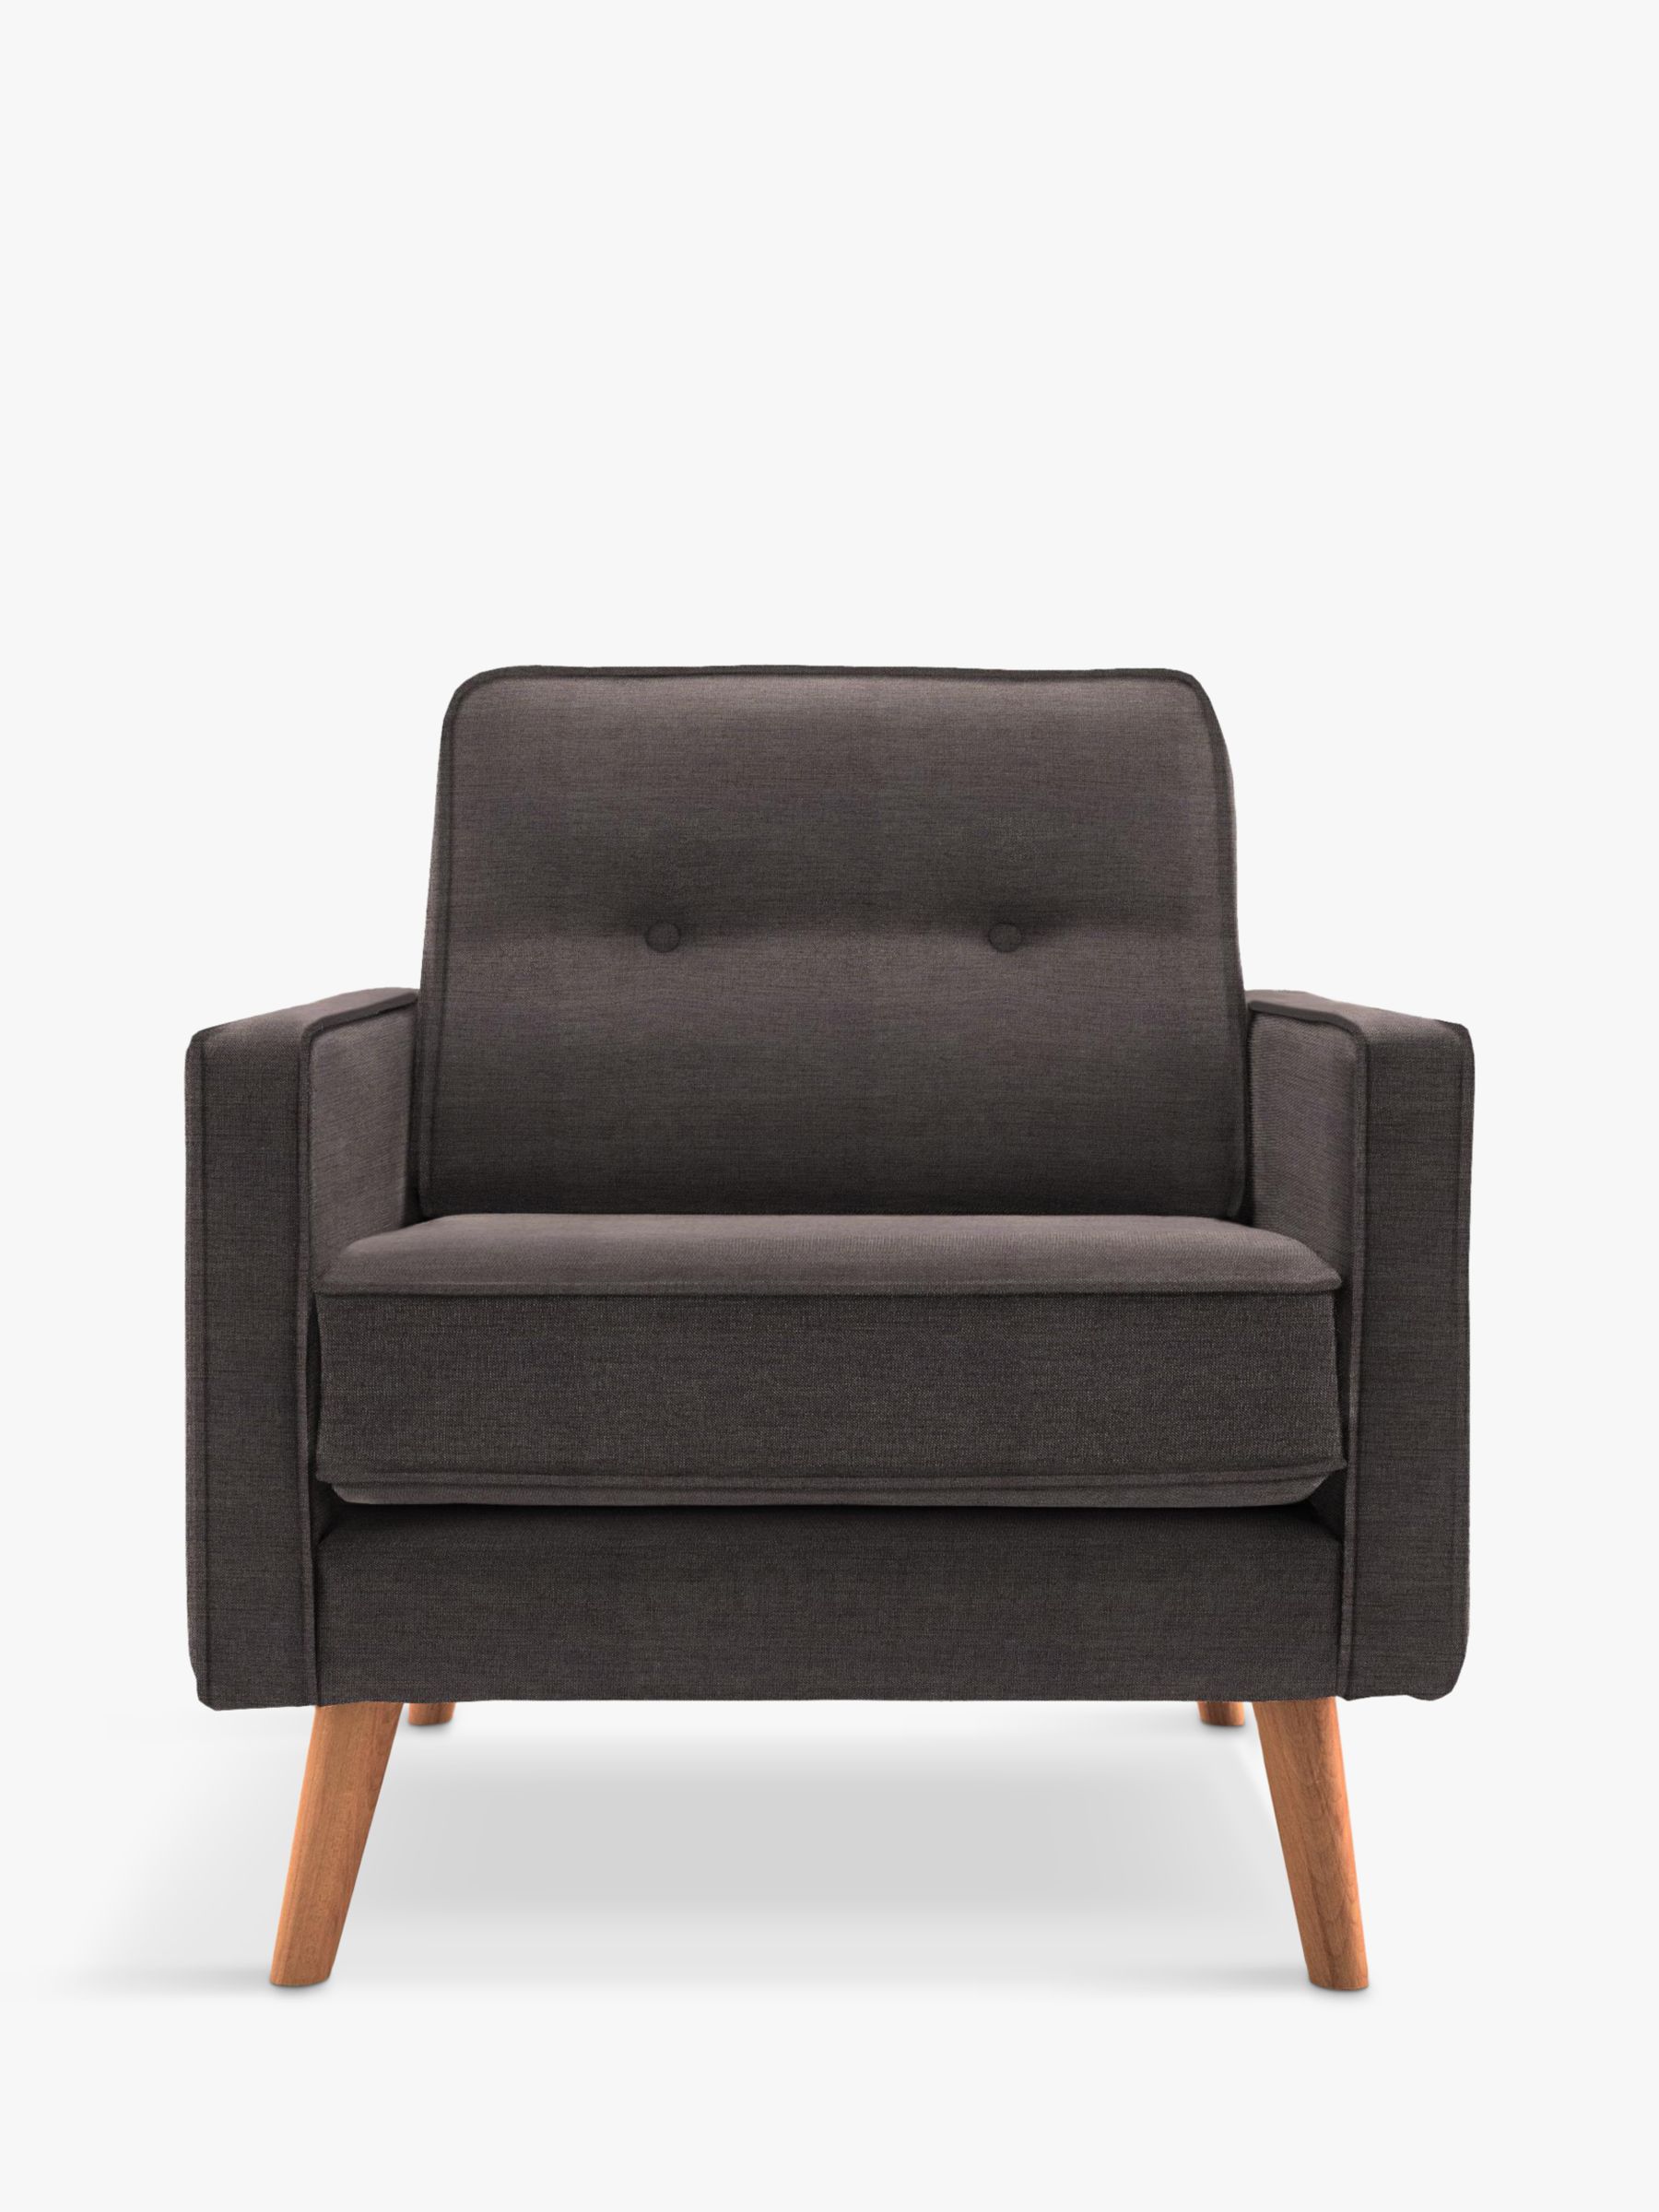 The Sixty Five Range, G Plan Vintage The Sixty Five Armchair, Tonic Charcoal